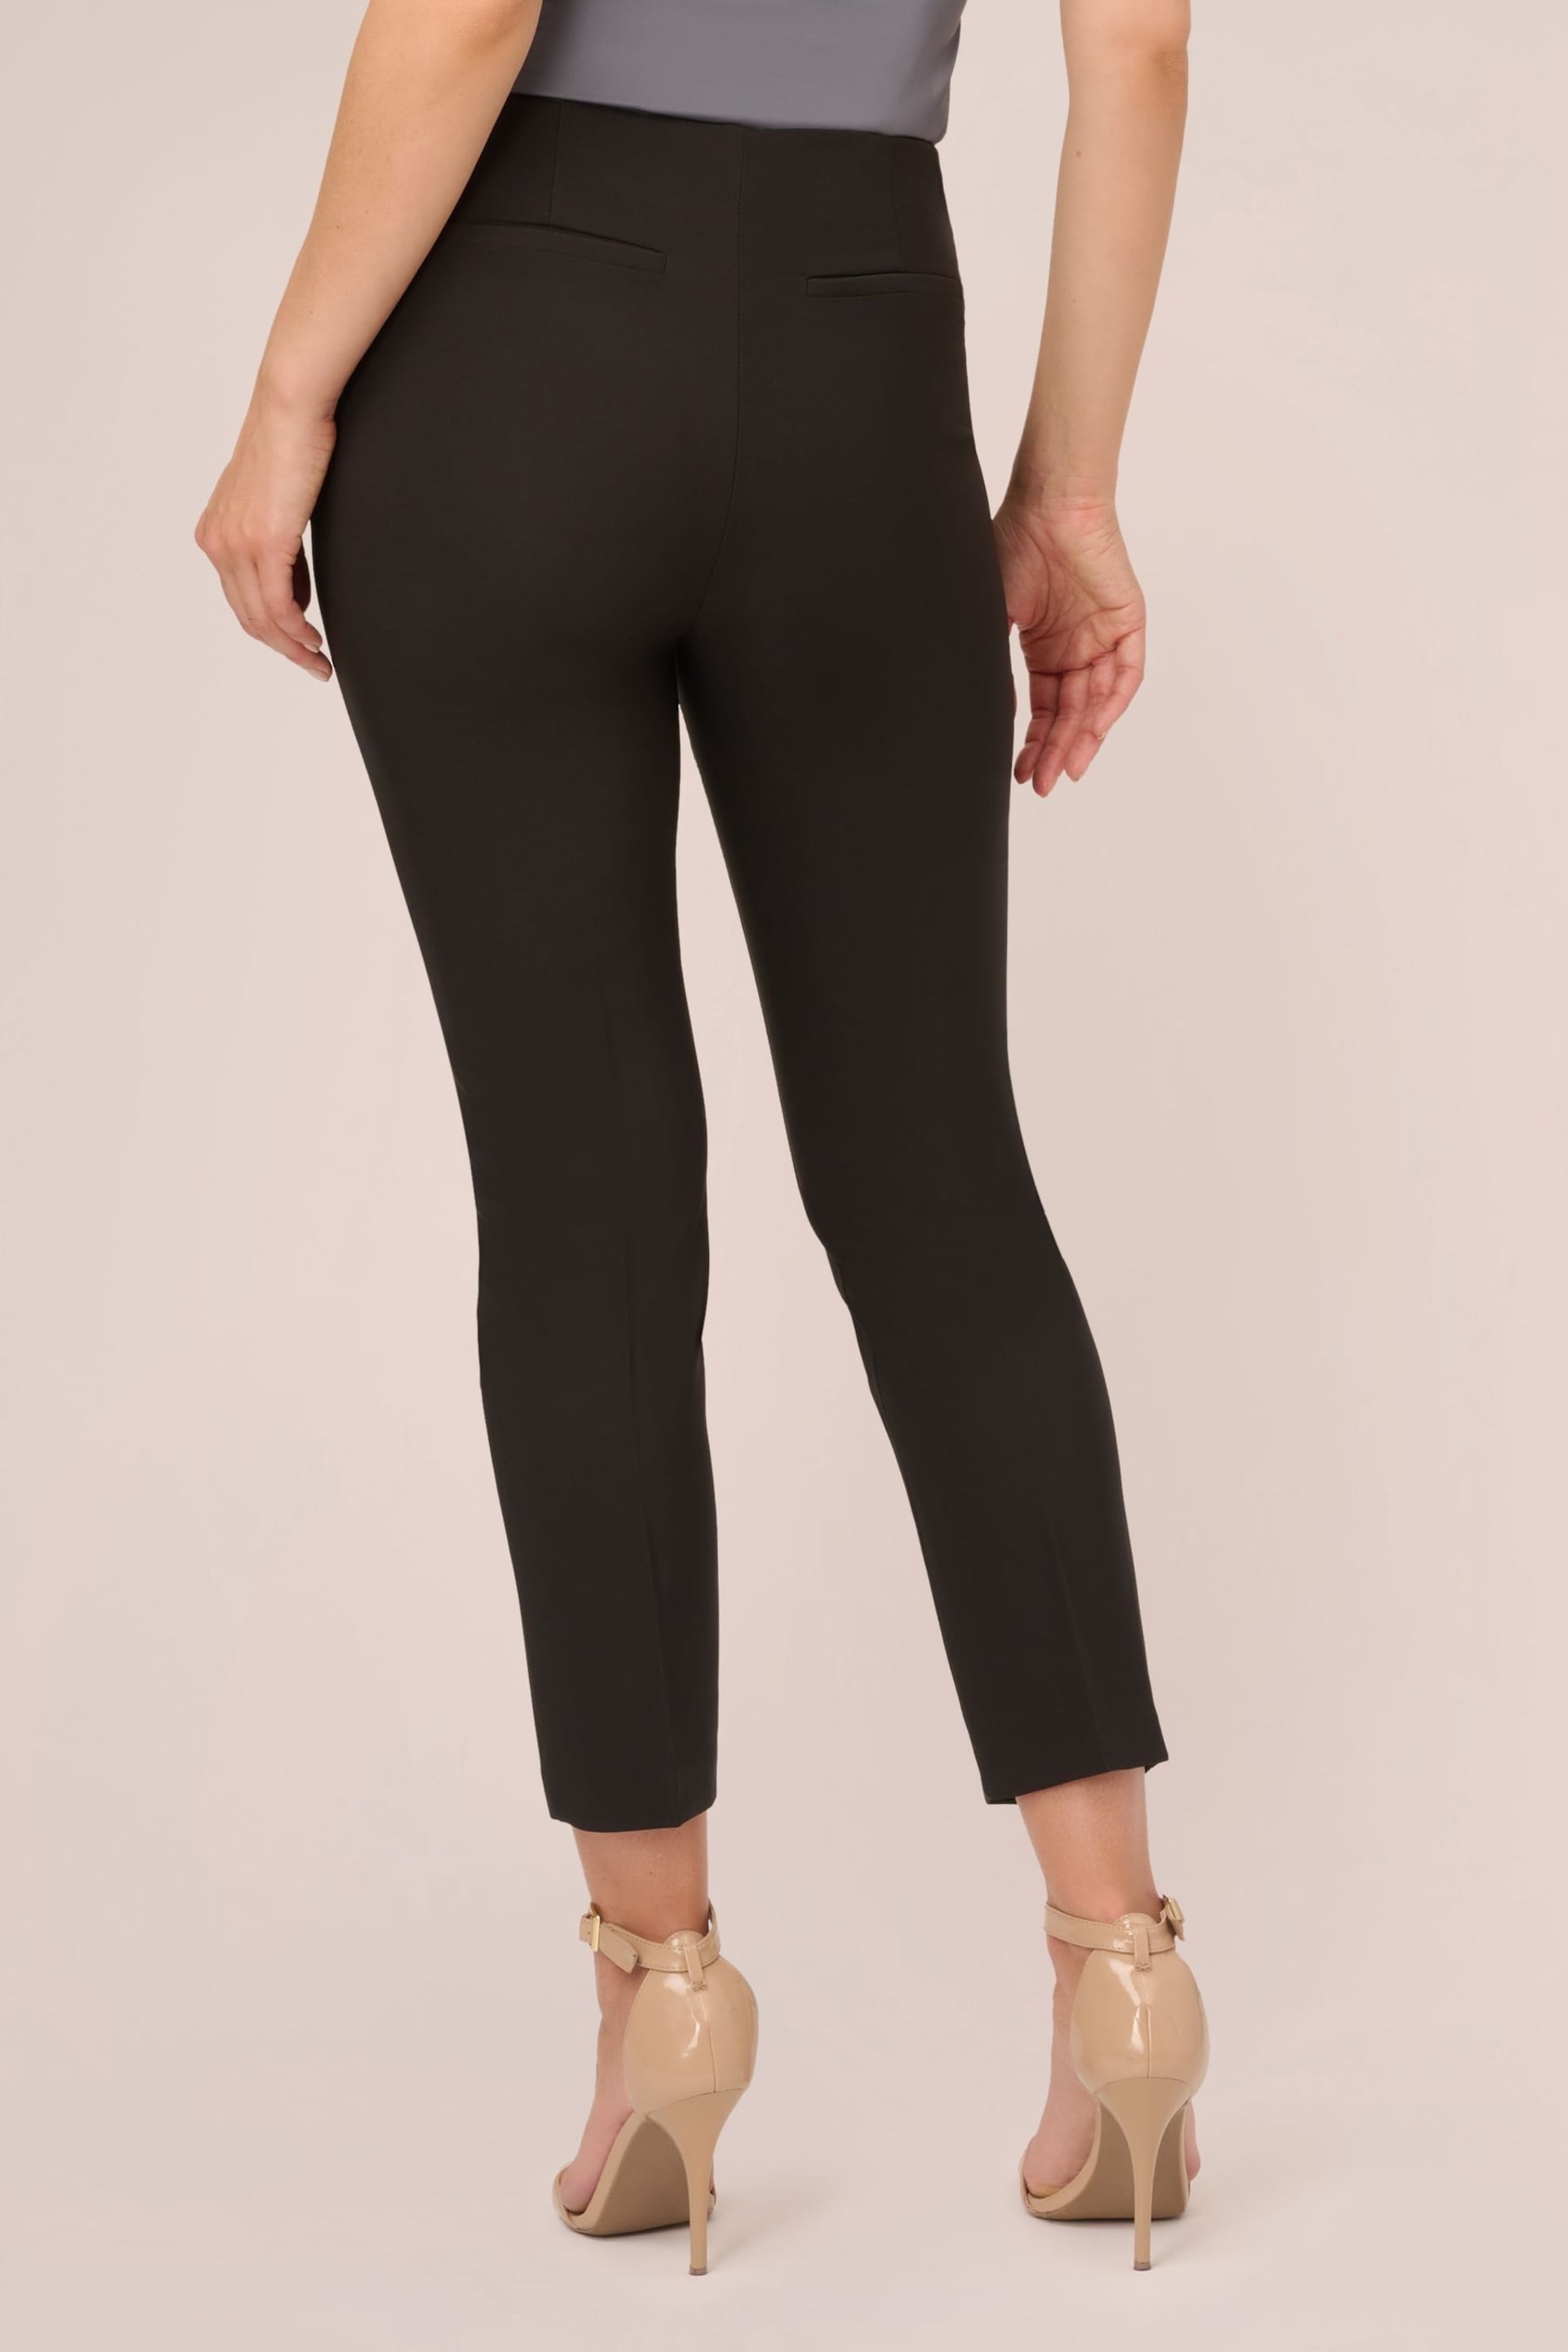 Adrianna Papell Solid Bi-Stretch Pull-On Black Trousers - Image 2 of 6